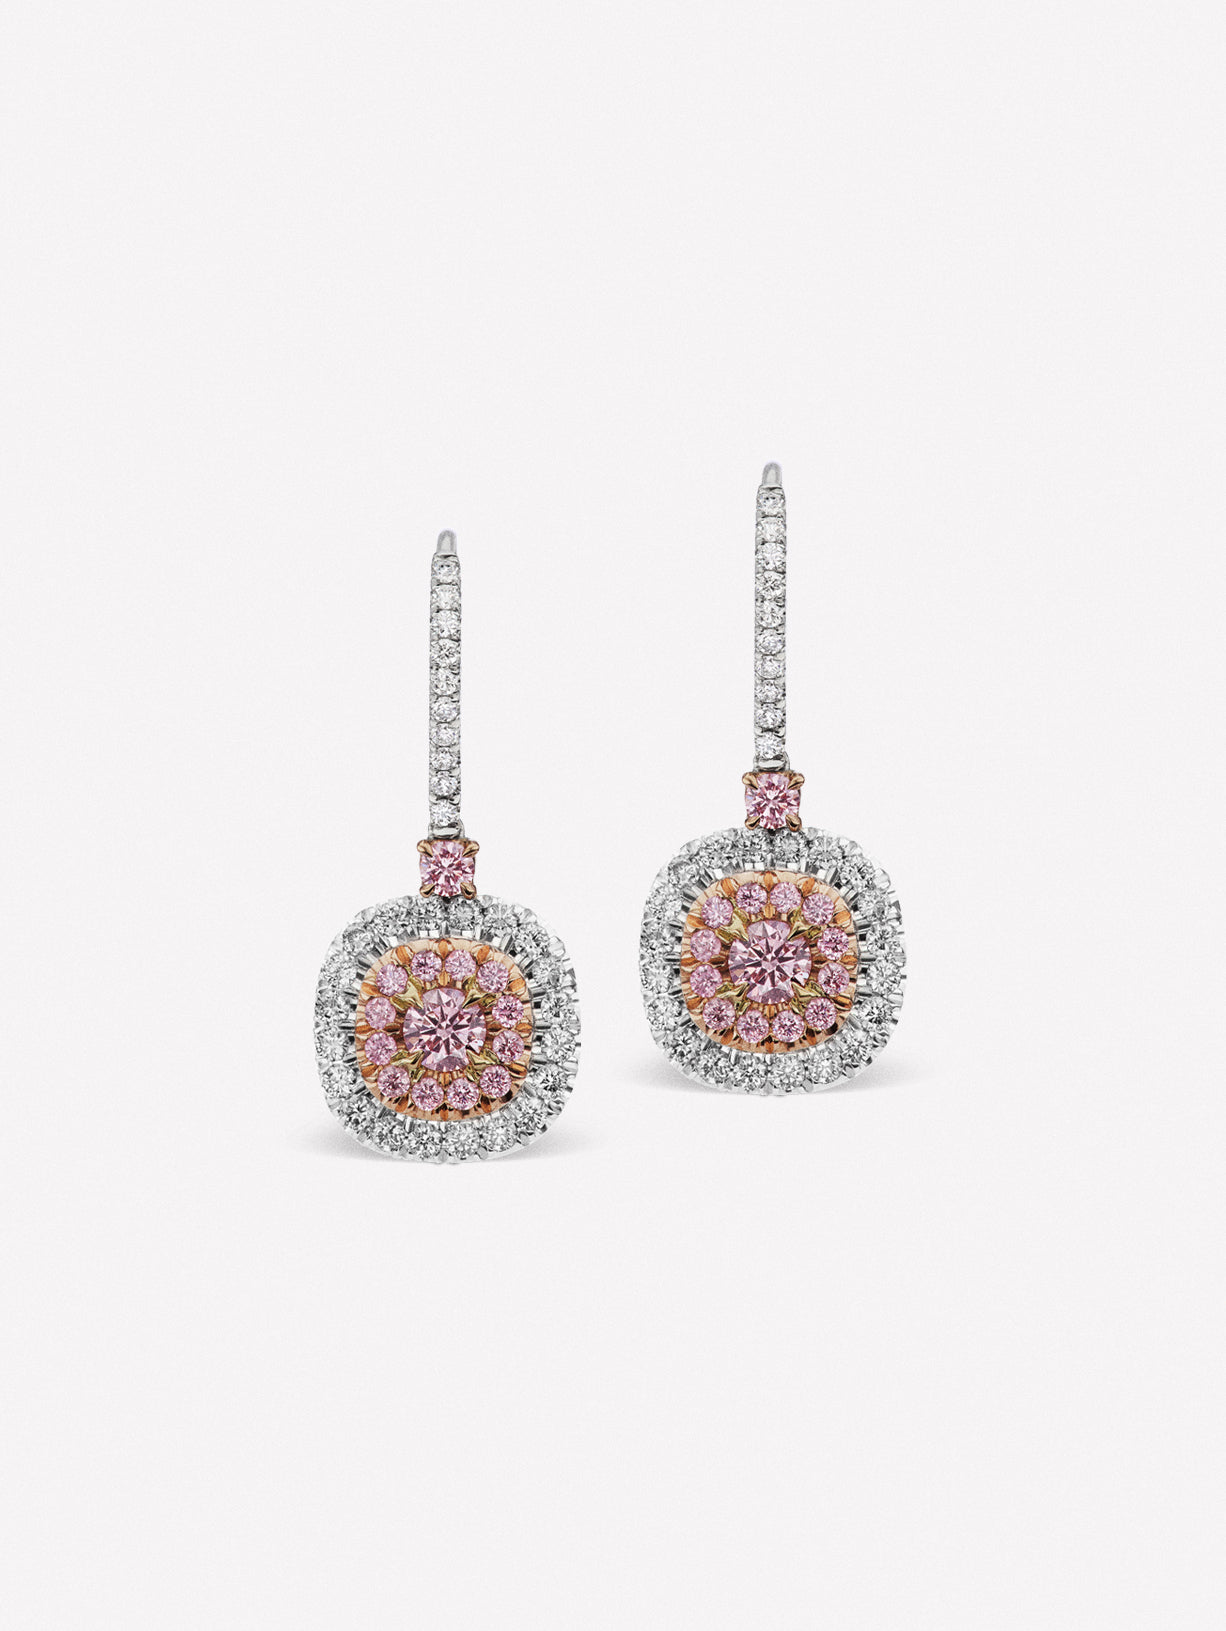 Certified Argyle Pink Diamonds | Classic Halo Pink Diamond Earrings by J F I N E in Platinum and 18K Pink Gold.